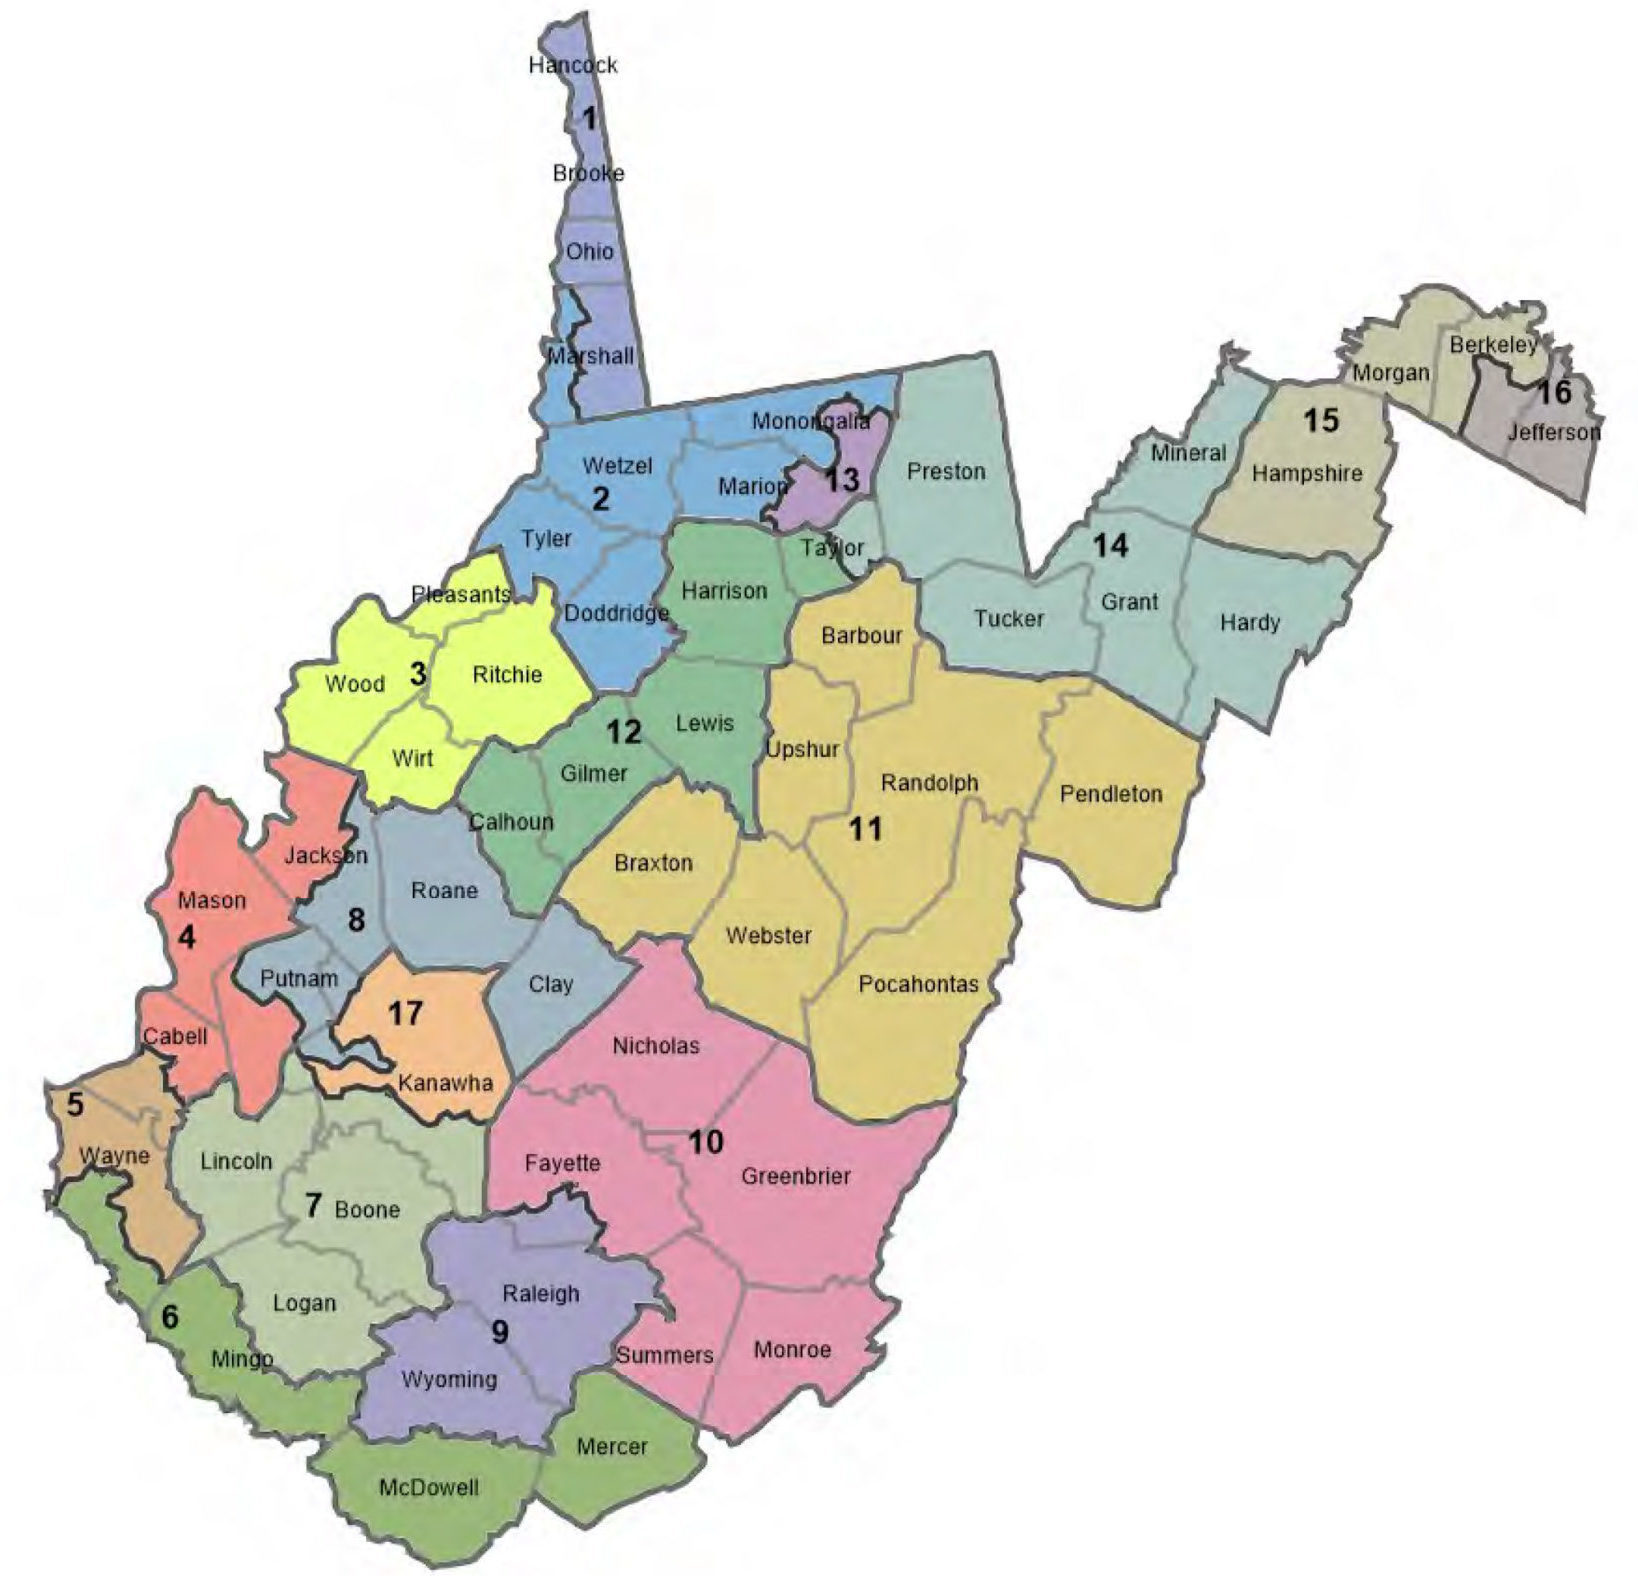 West Virginia Changes All State and Congressional Election Districts